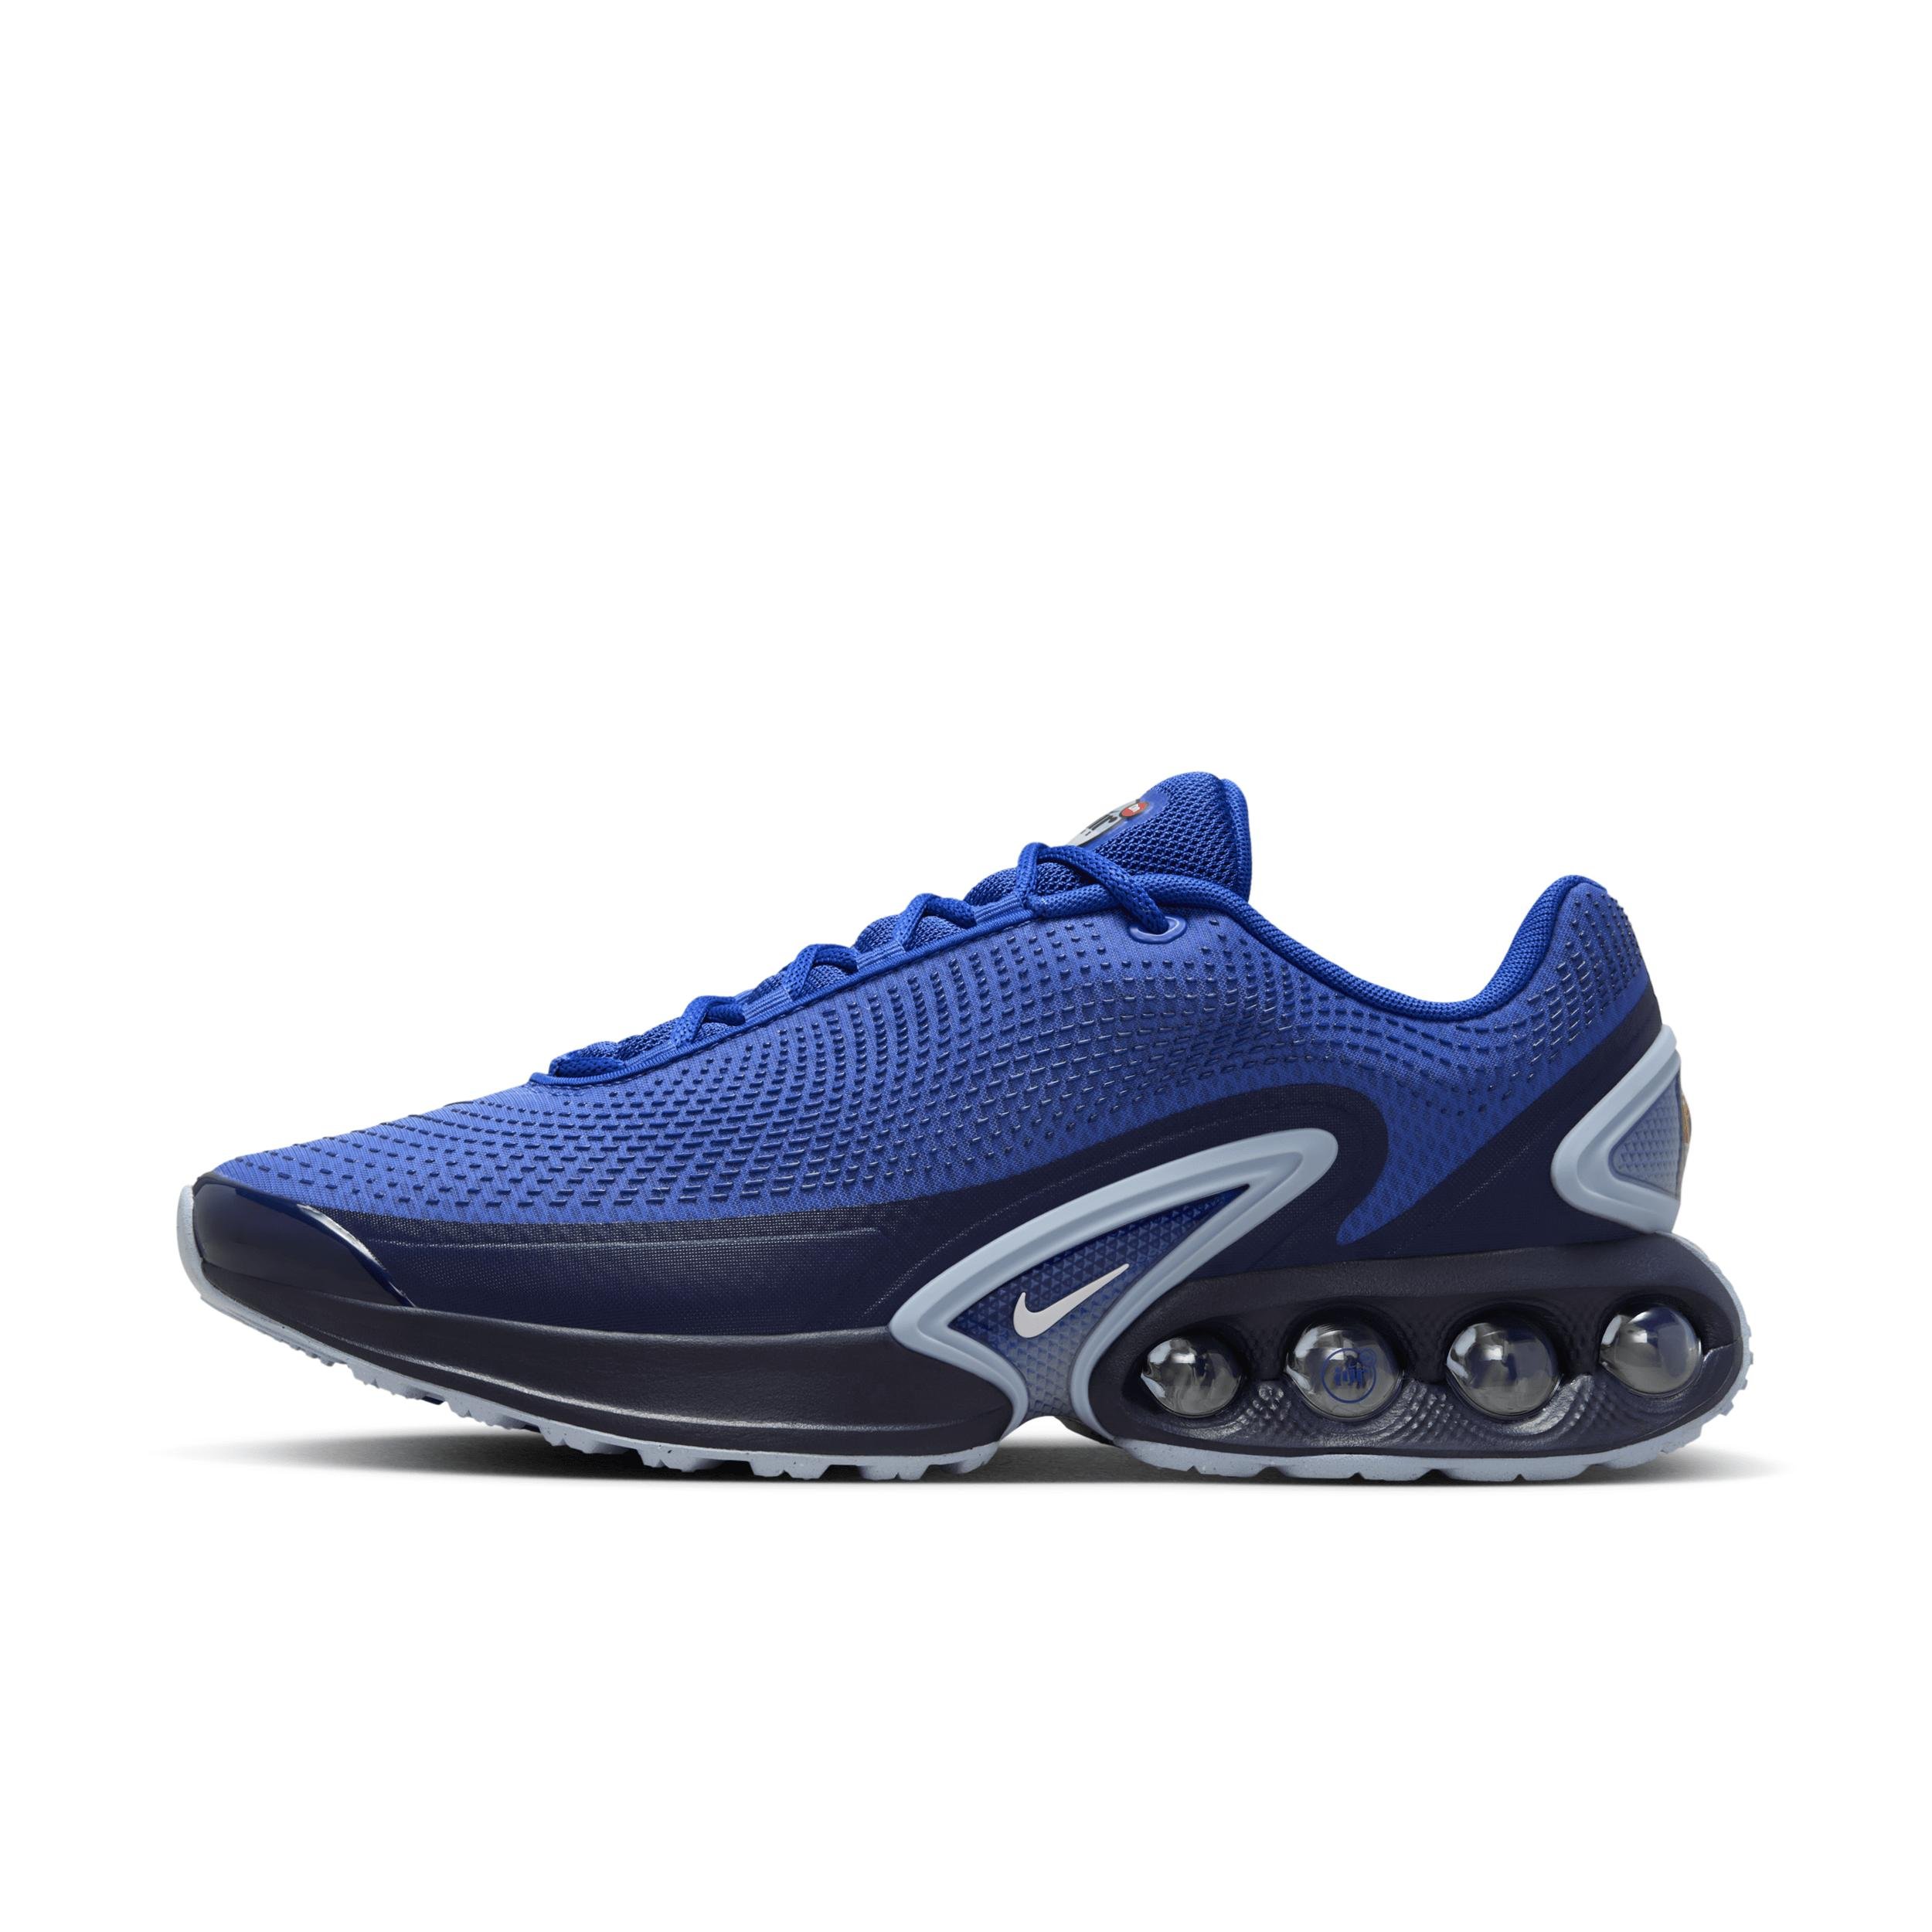 Nike Men's Air Max Dn Shoes by NIKE